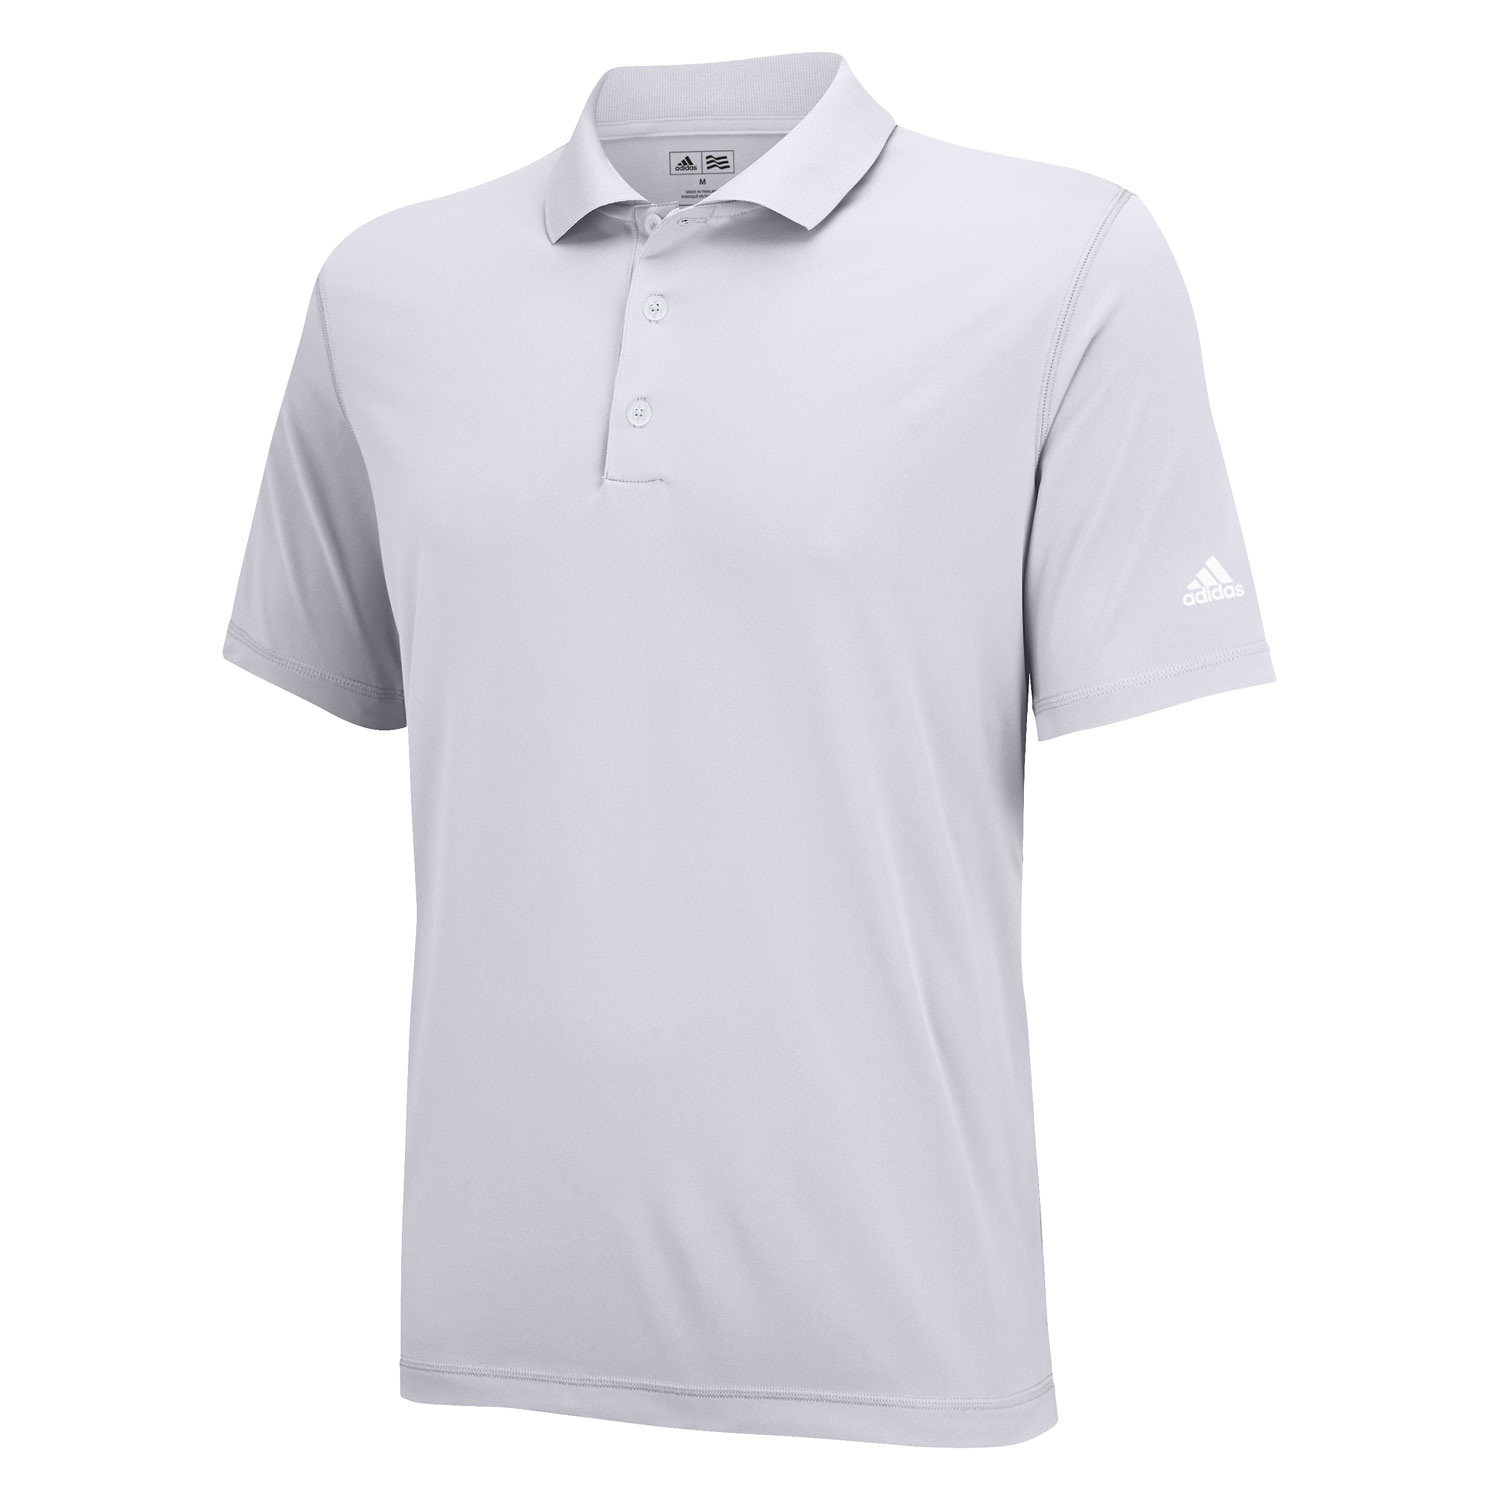 Men's Solid Polo, Light Onix, XX-Large